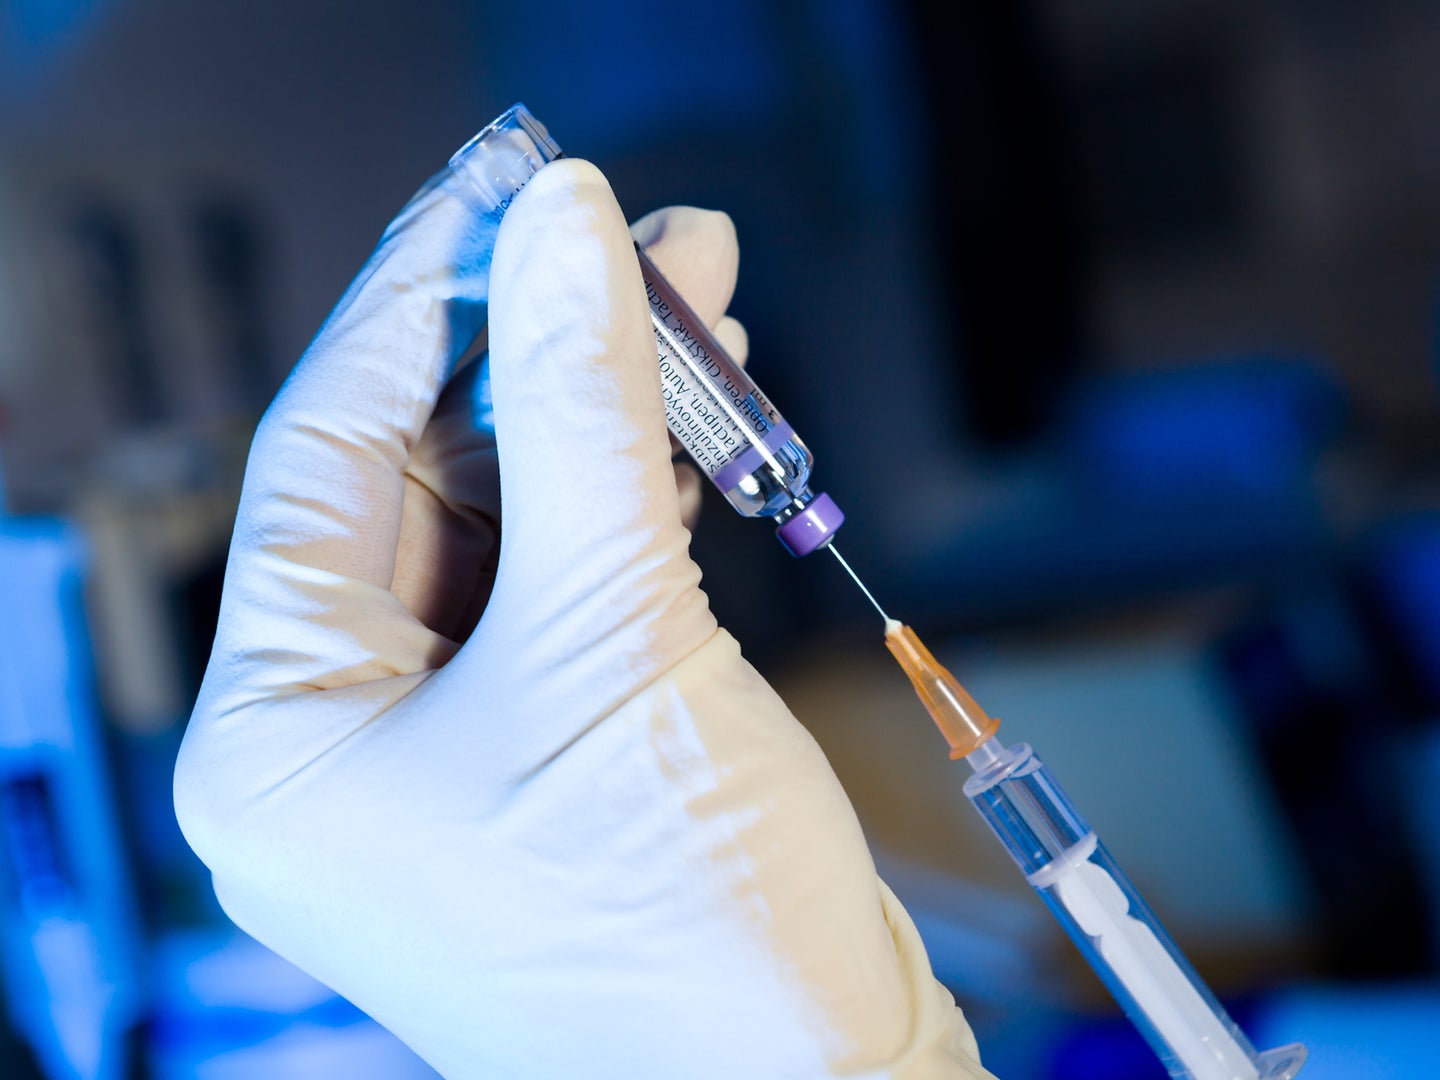 Scientist's gloved hands using syringe to fill vaccine shot